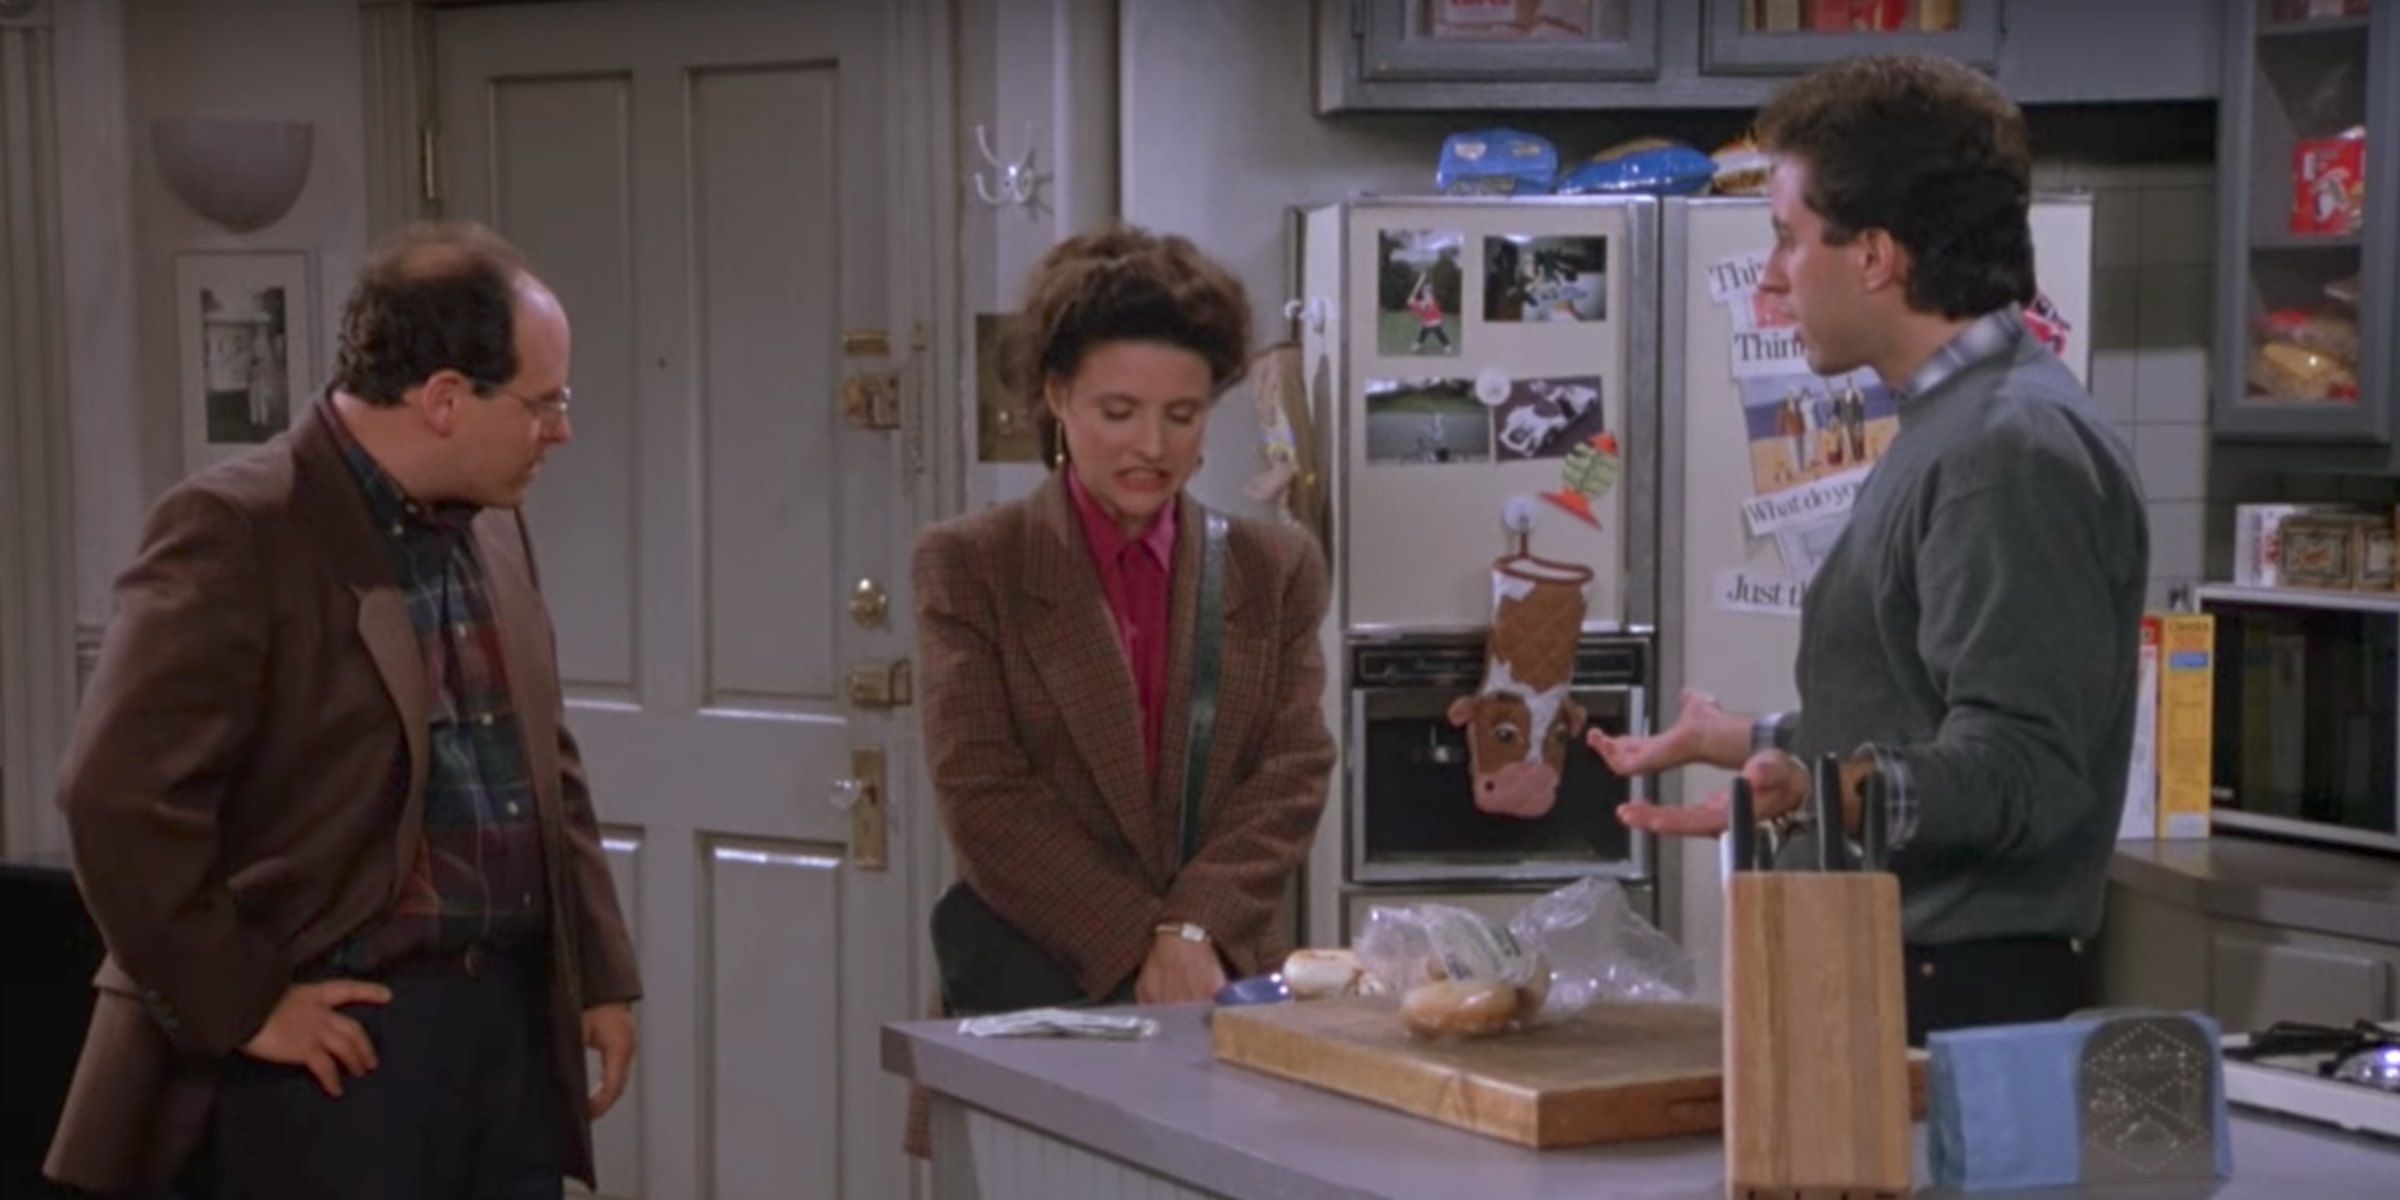 George, Elaine, and Jerry in Jerry's apartment in Seinfeld